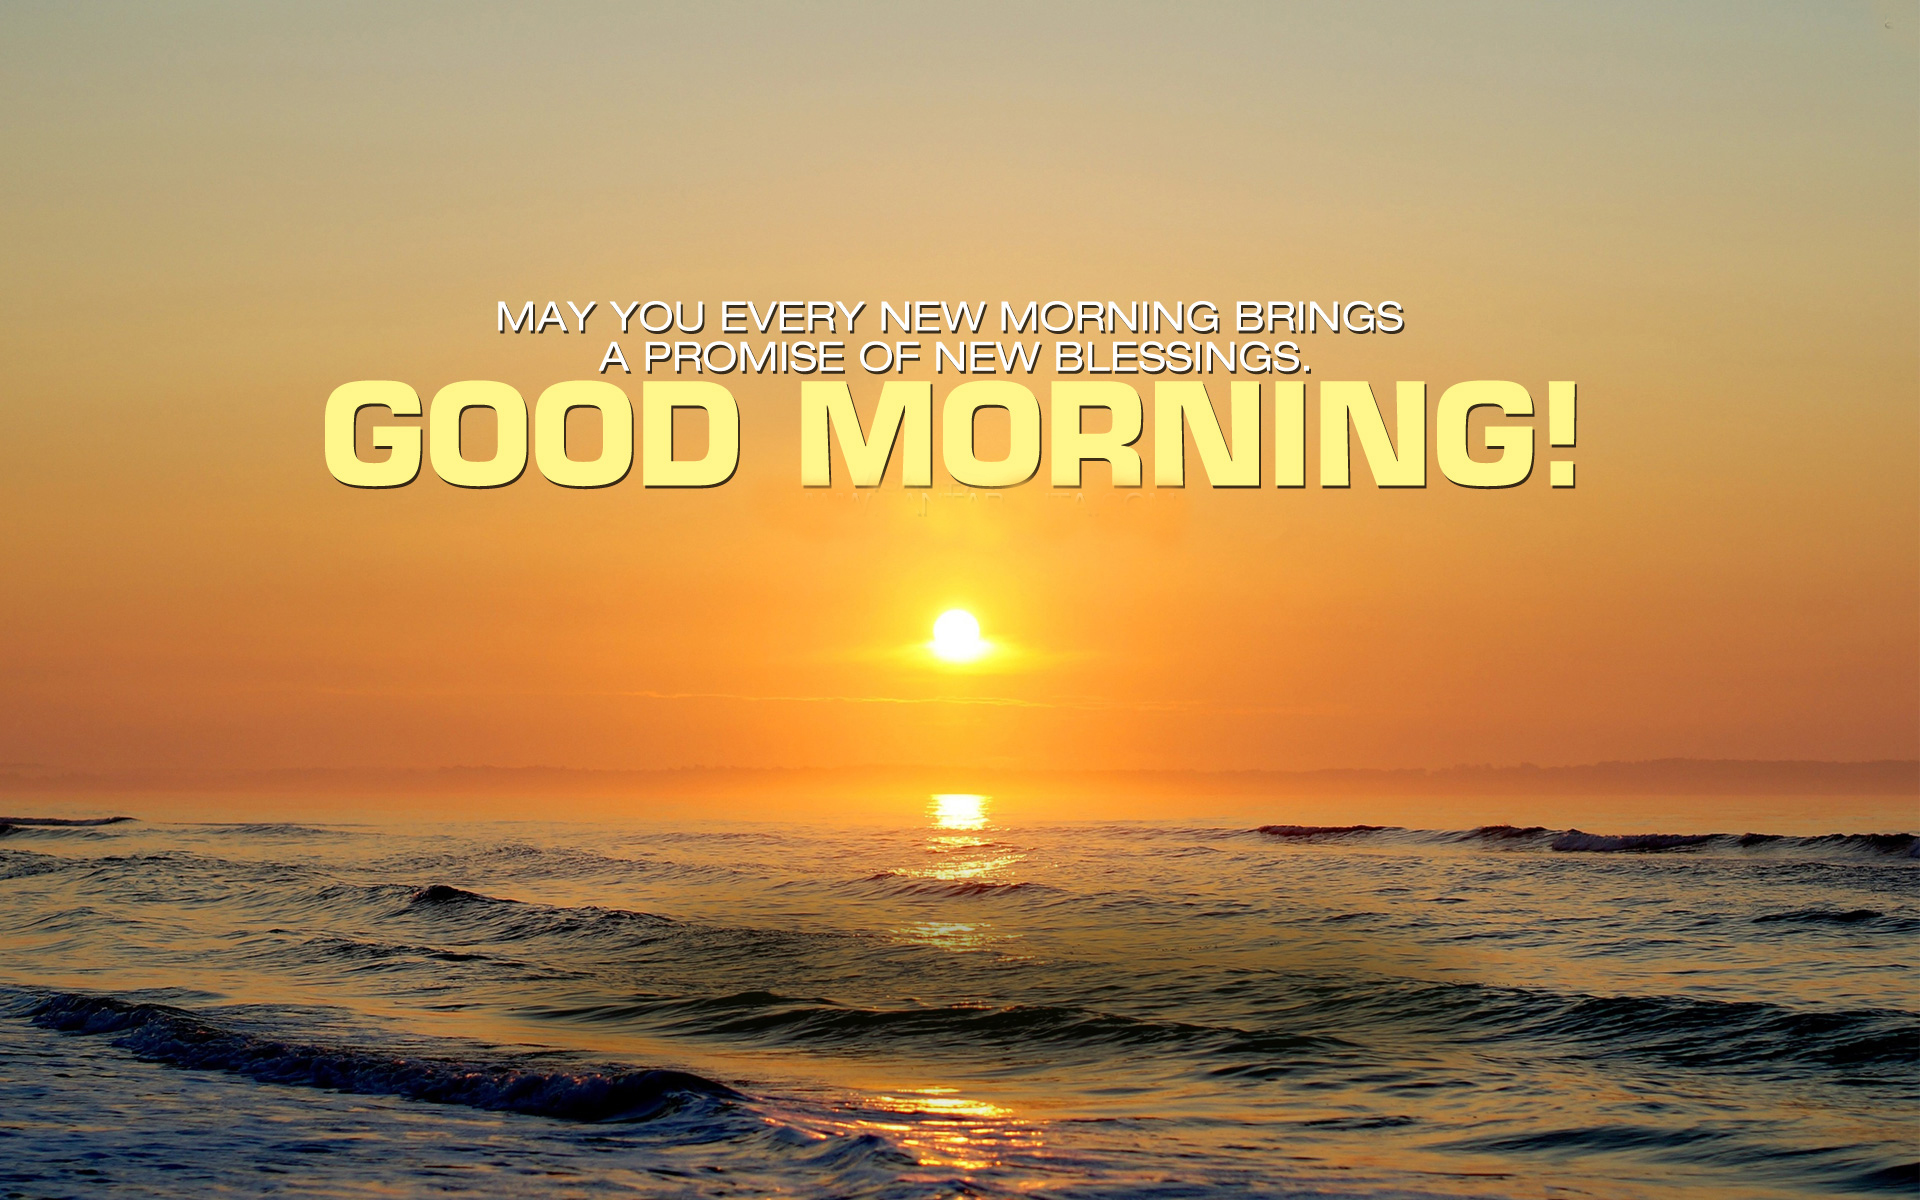 Good Morning Wishes HD Wallpaper